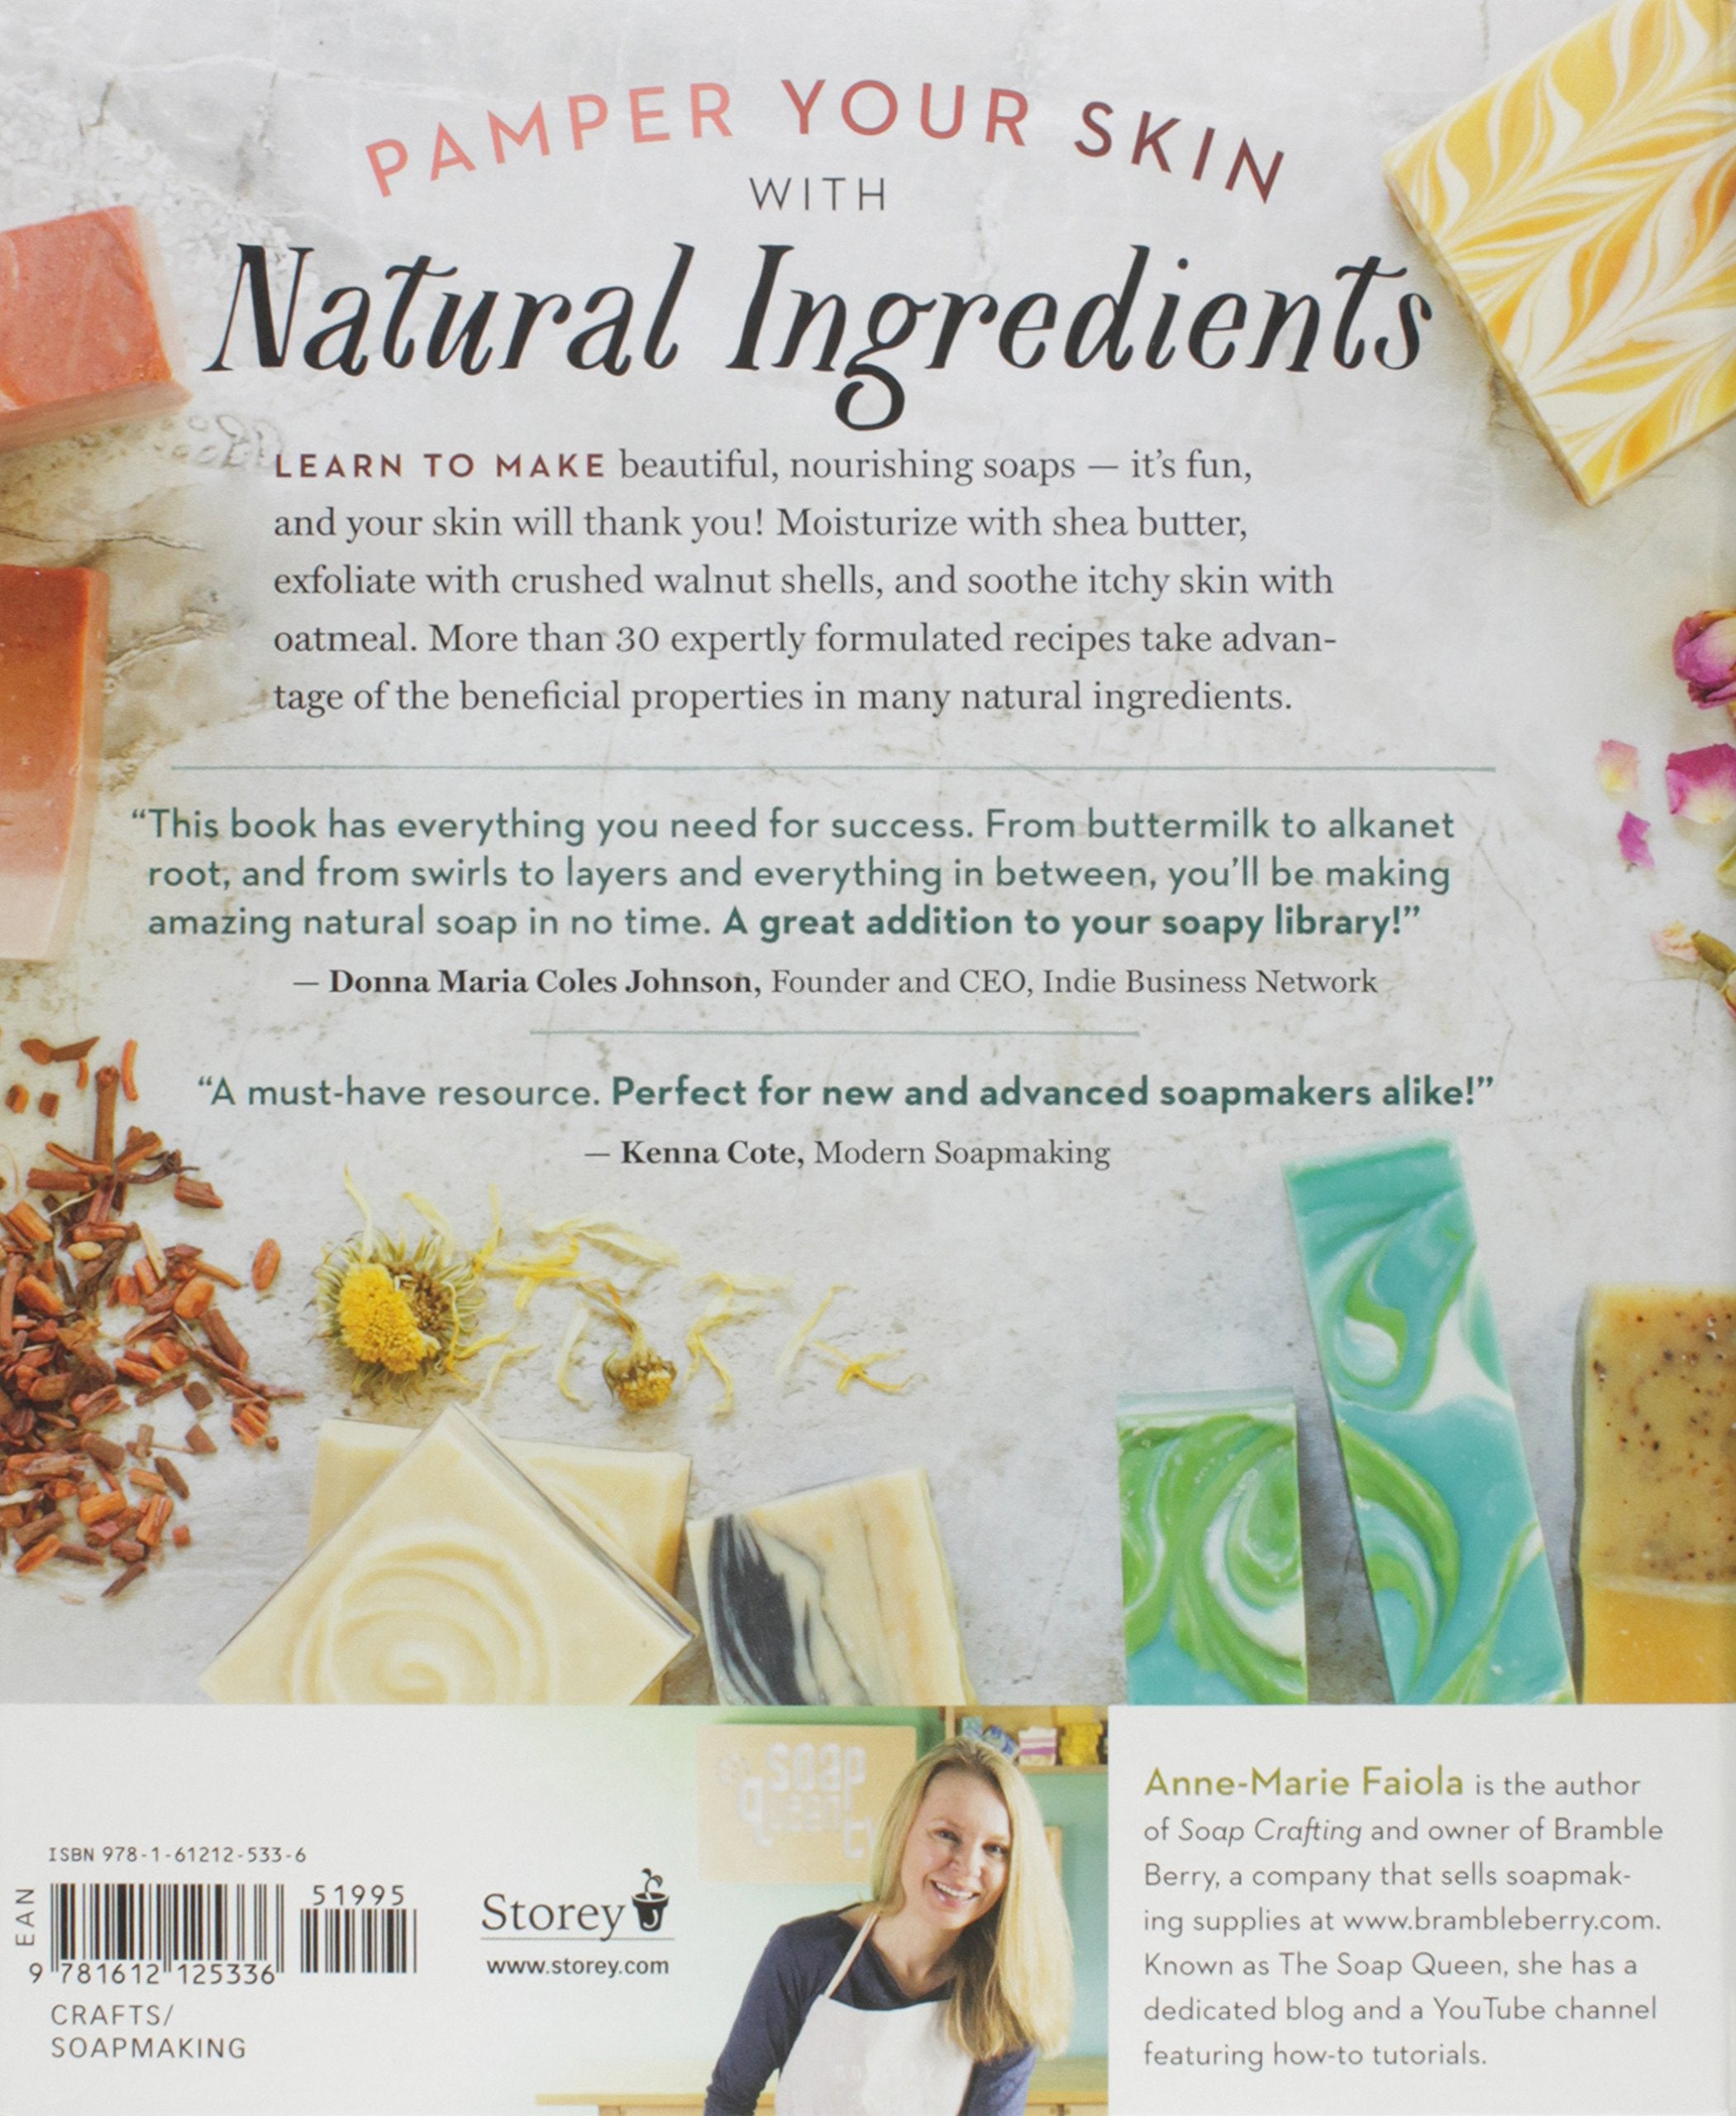 Pure Soapmaking: How to Create Nourishing Natural Skin Care Soaps